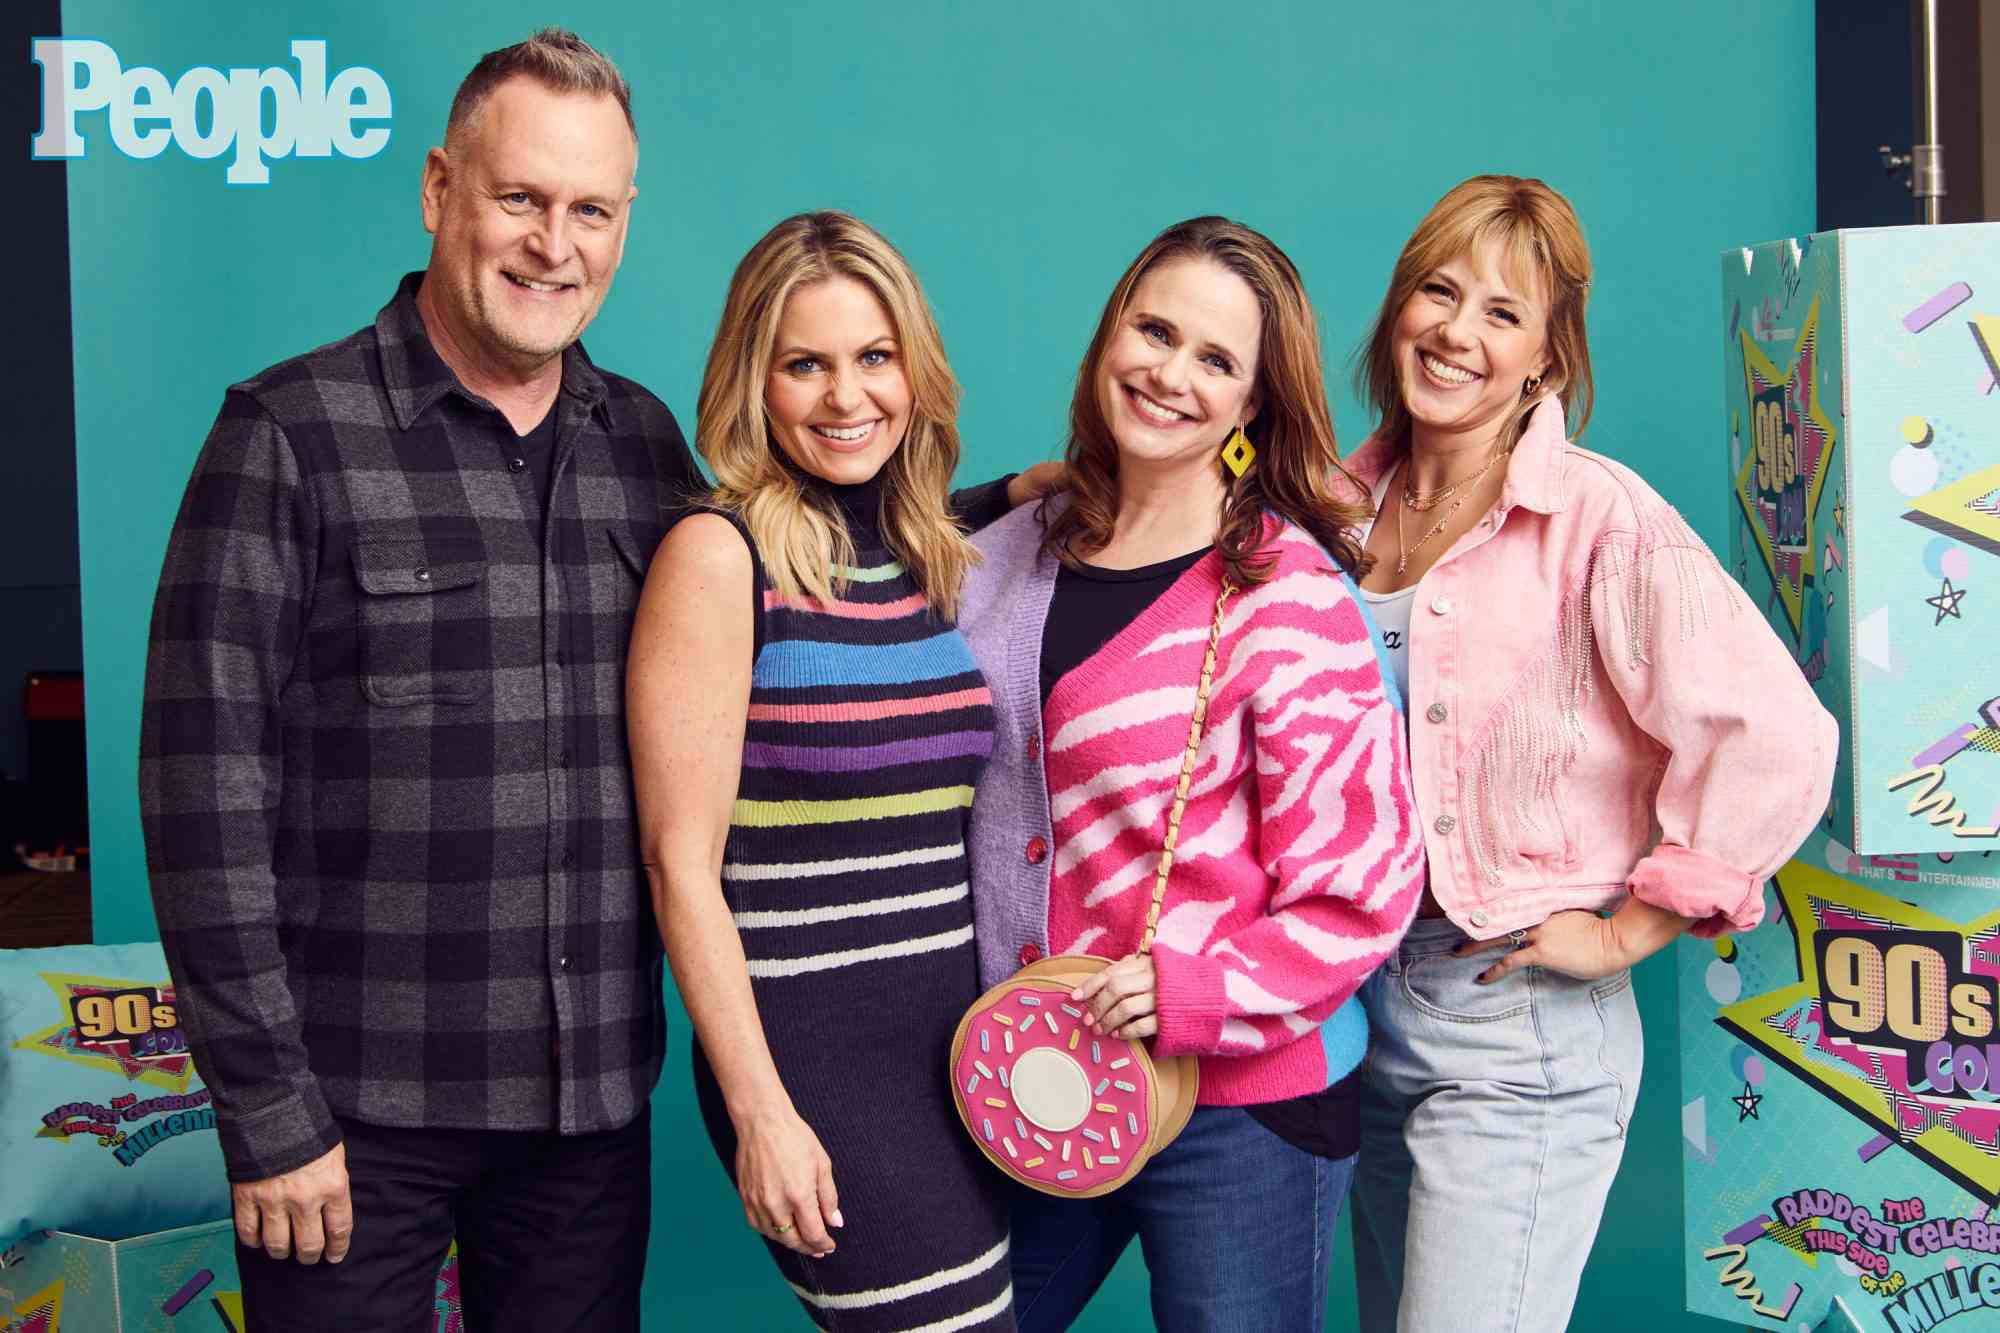 HARTFORD, CONNECTICUT - MARCH 18: (L-R) Dave Coulier, Candace Cameron Bure, Andrea Barber and Jodie Sweetin attend 90s Con held at Connecticut Convention Center on March 18, 2023 in Hartford, Connecticut. (Photos by Emily Assiran/Getty Images for 90's Con) (Photo by Emily Assiran/Getty Images)